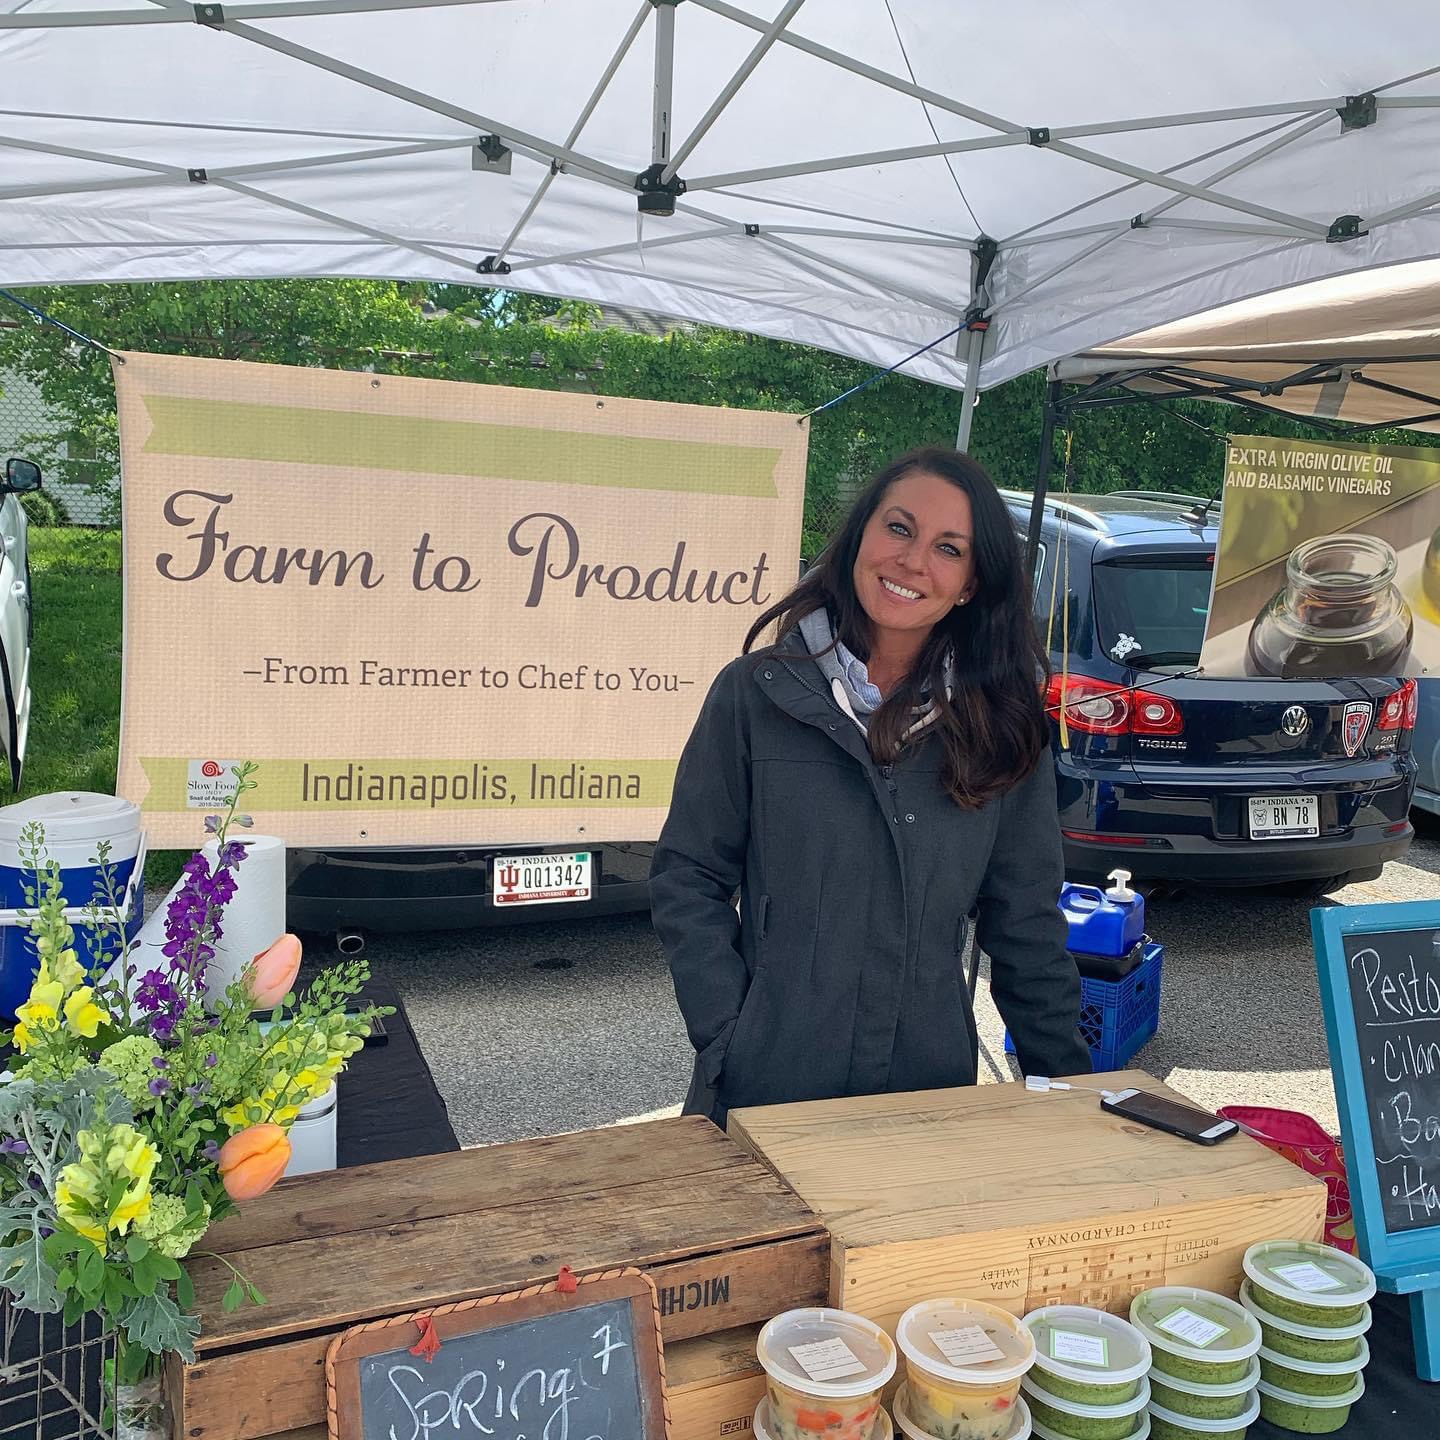 Farm to Product Owner at stand